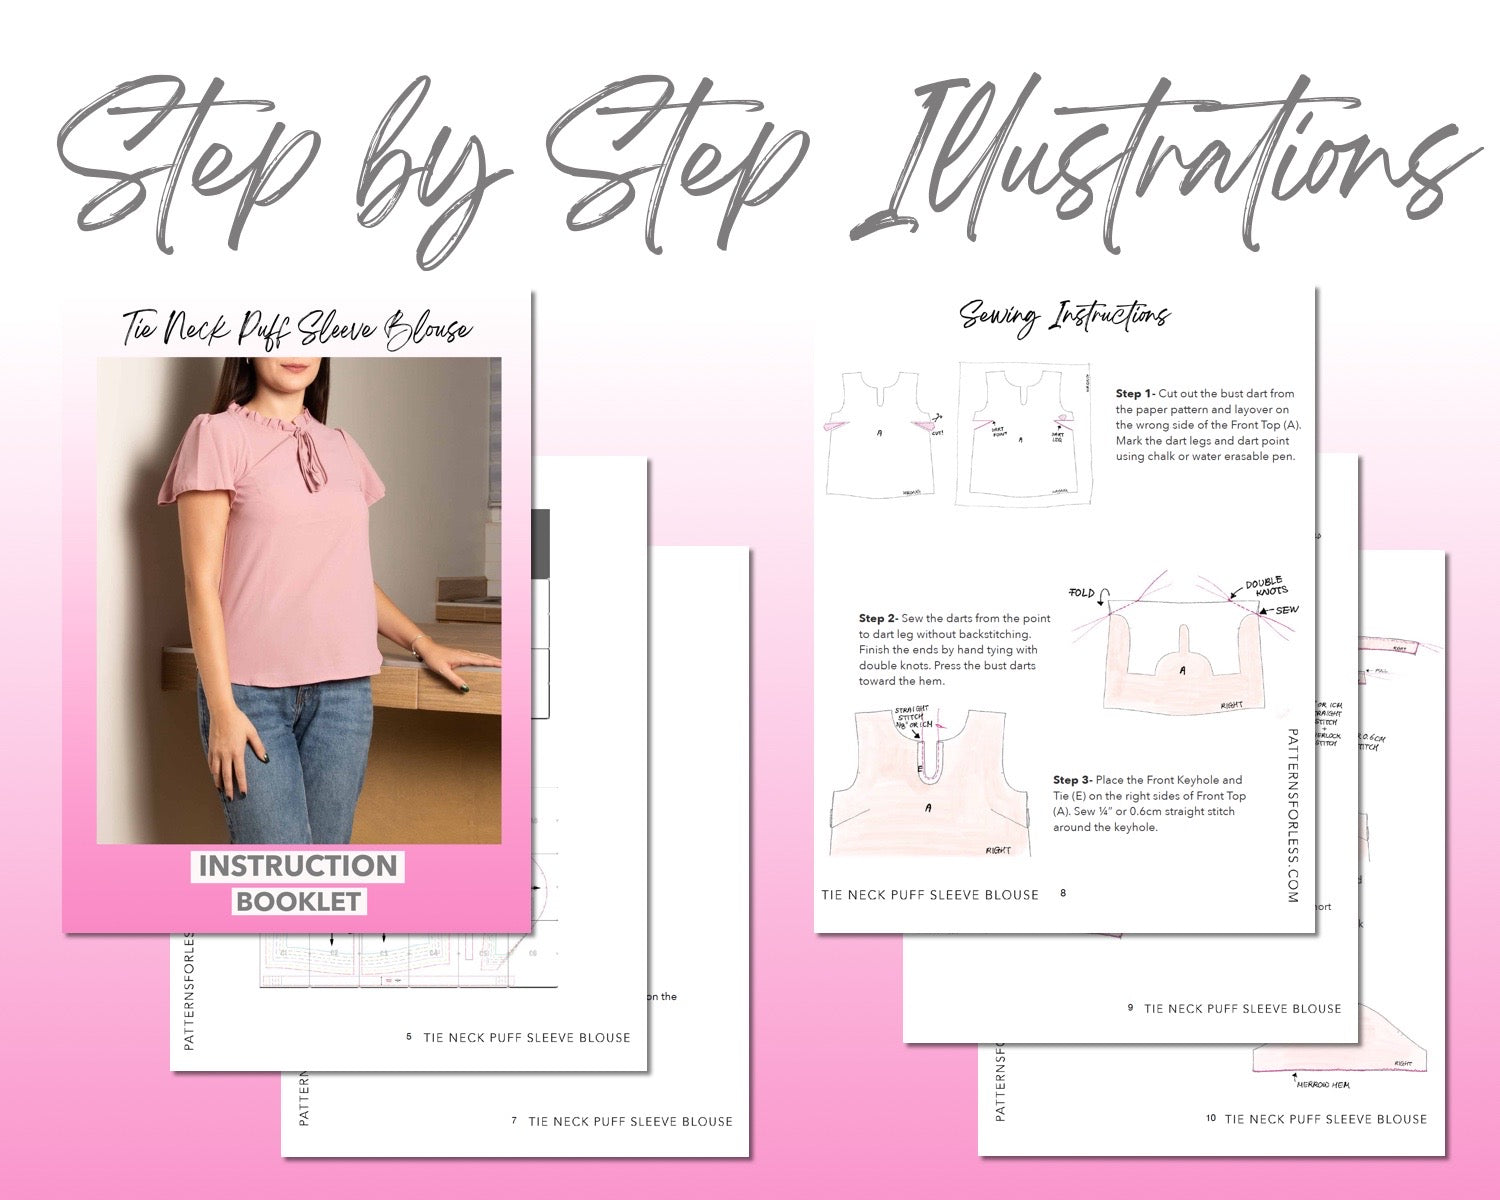 Tie Neck Puff Sleeve Blouse sewing pattern step by step illustrations.